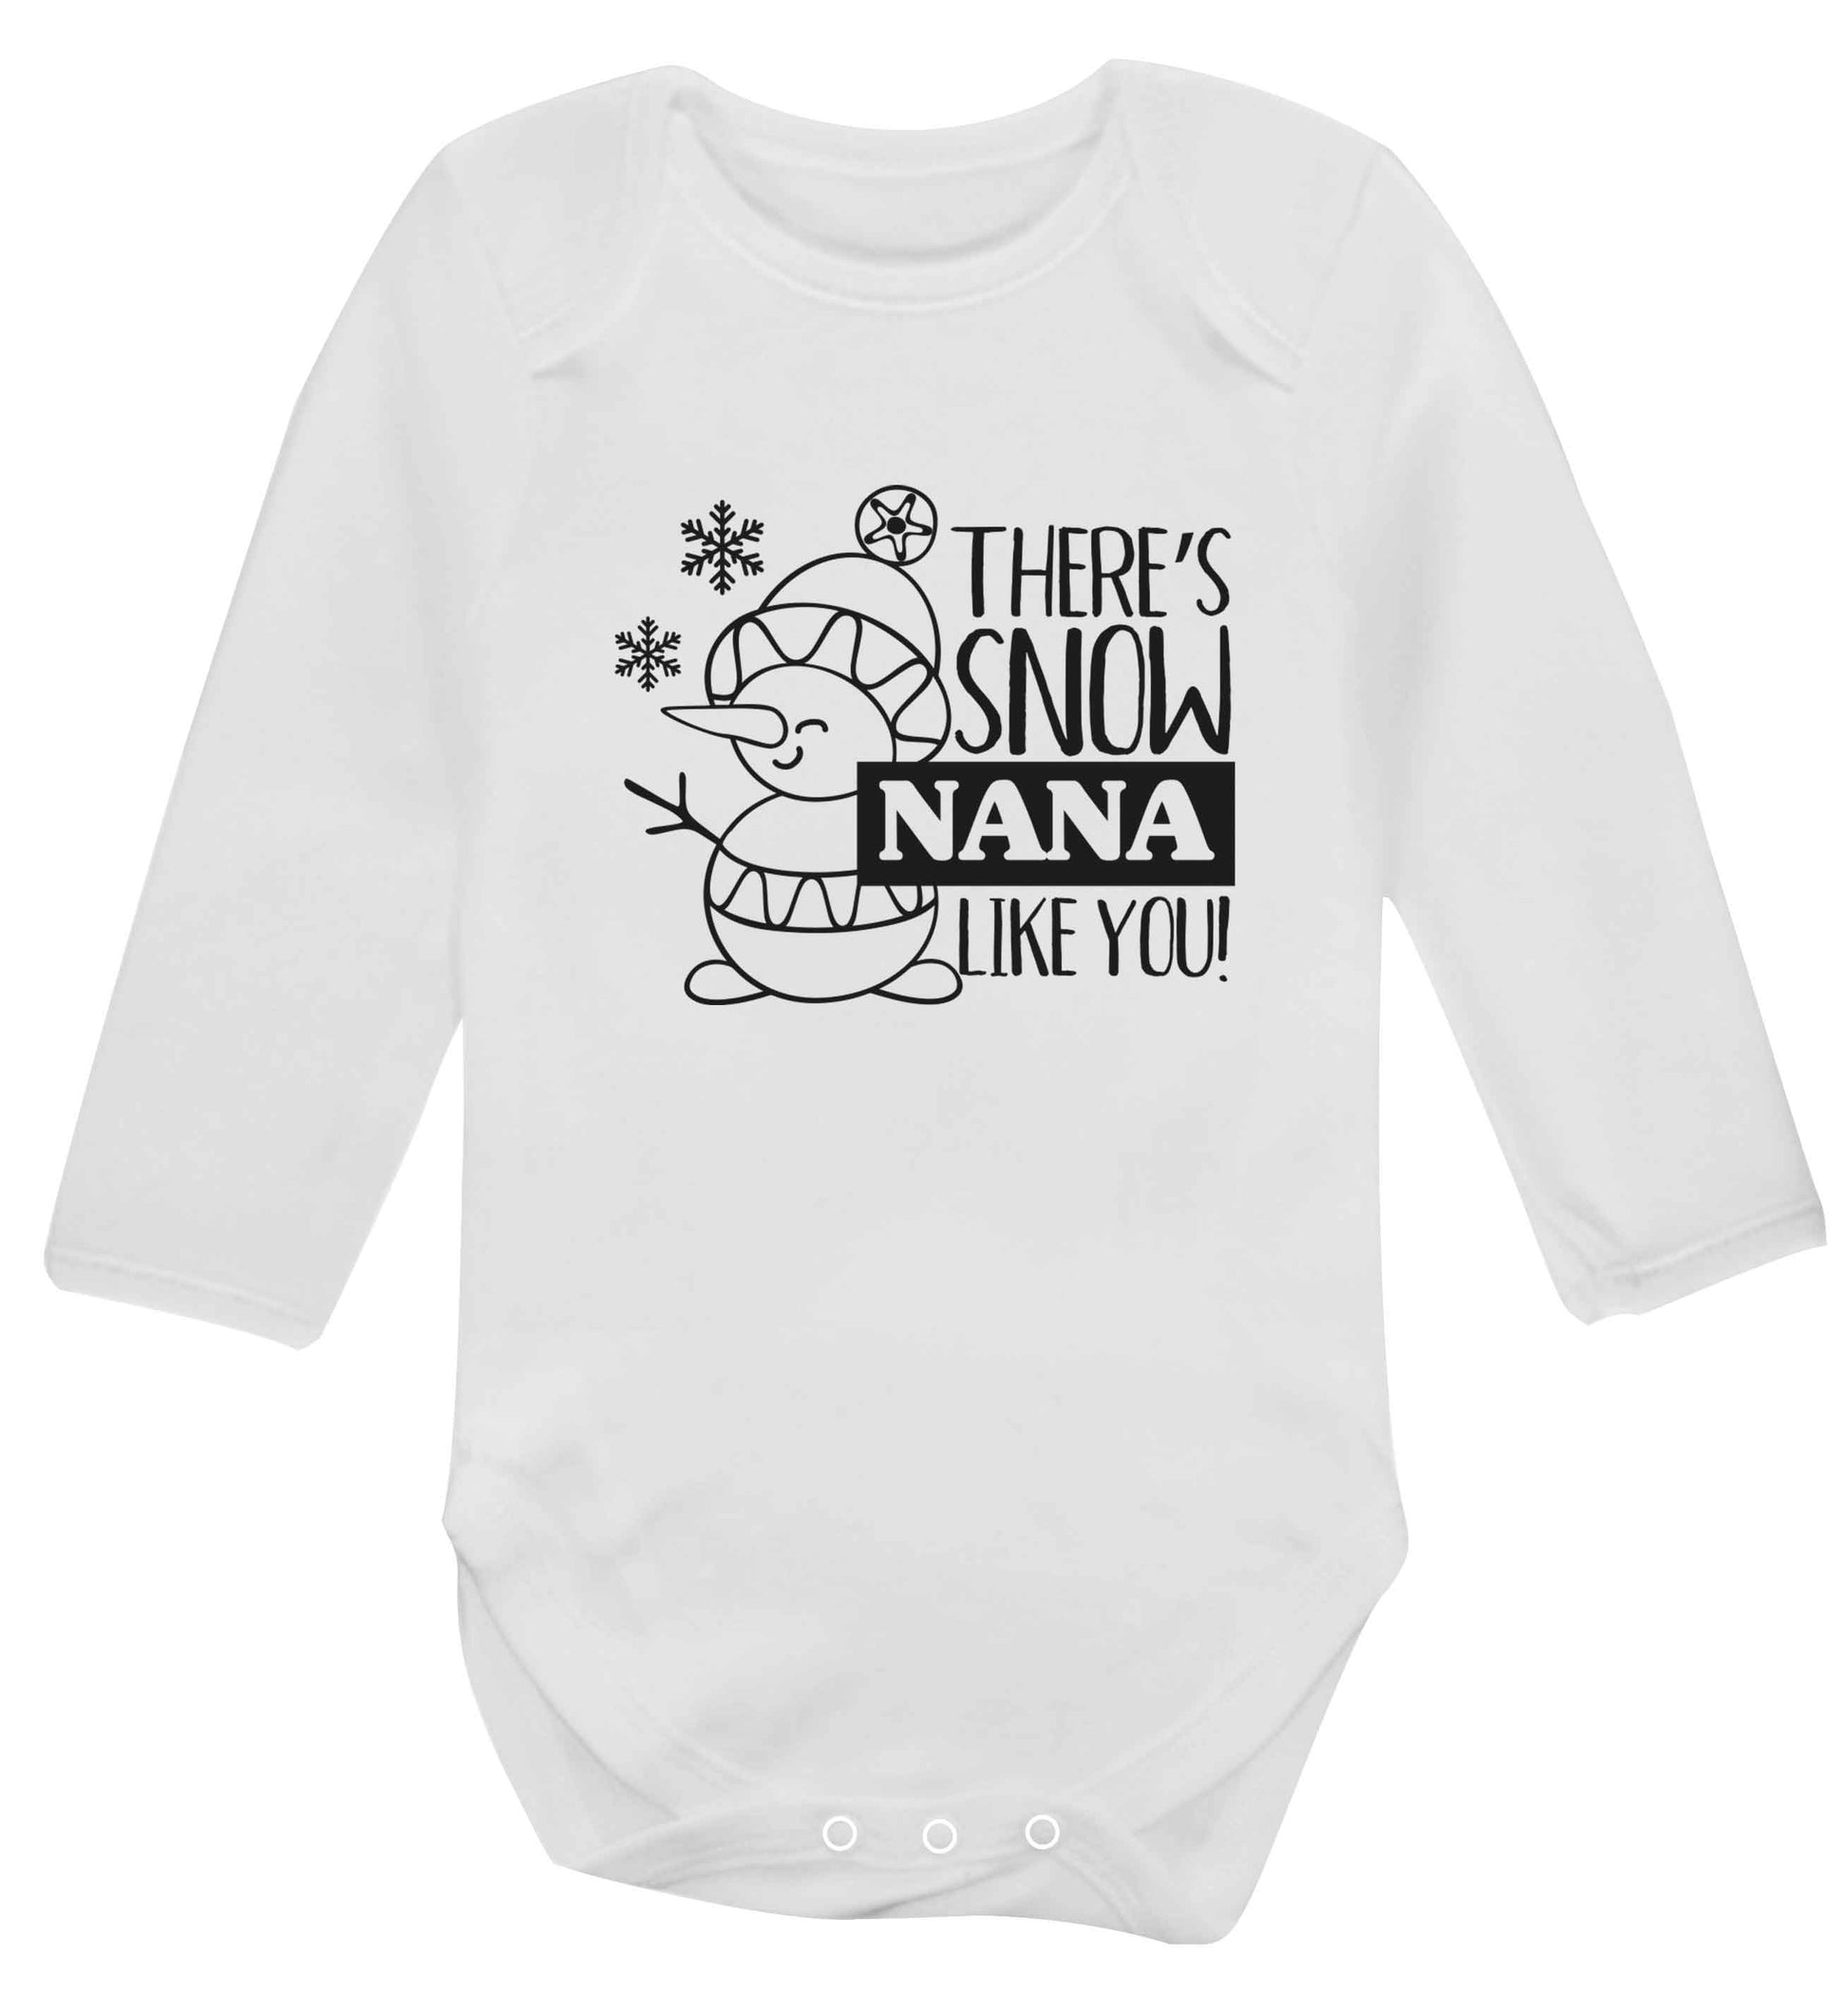 There's snow nana like you baby vest long sleeved white 6-12 months